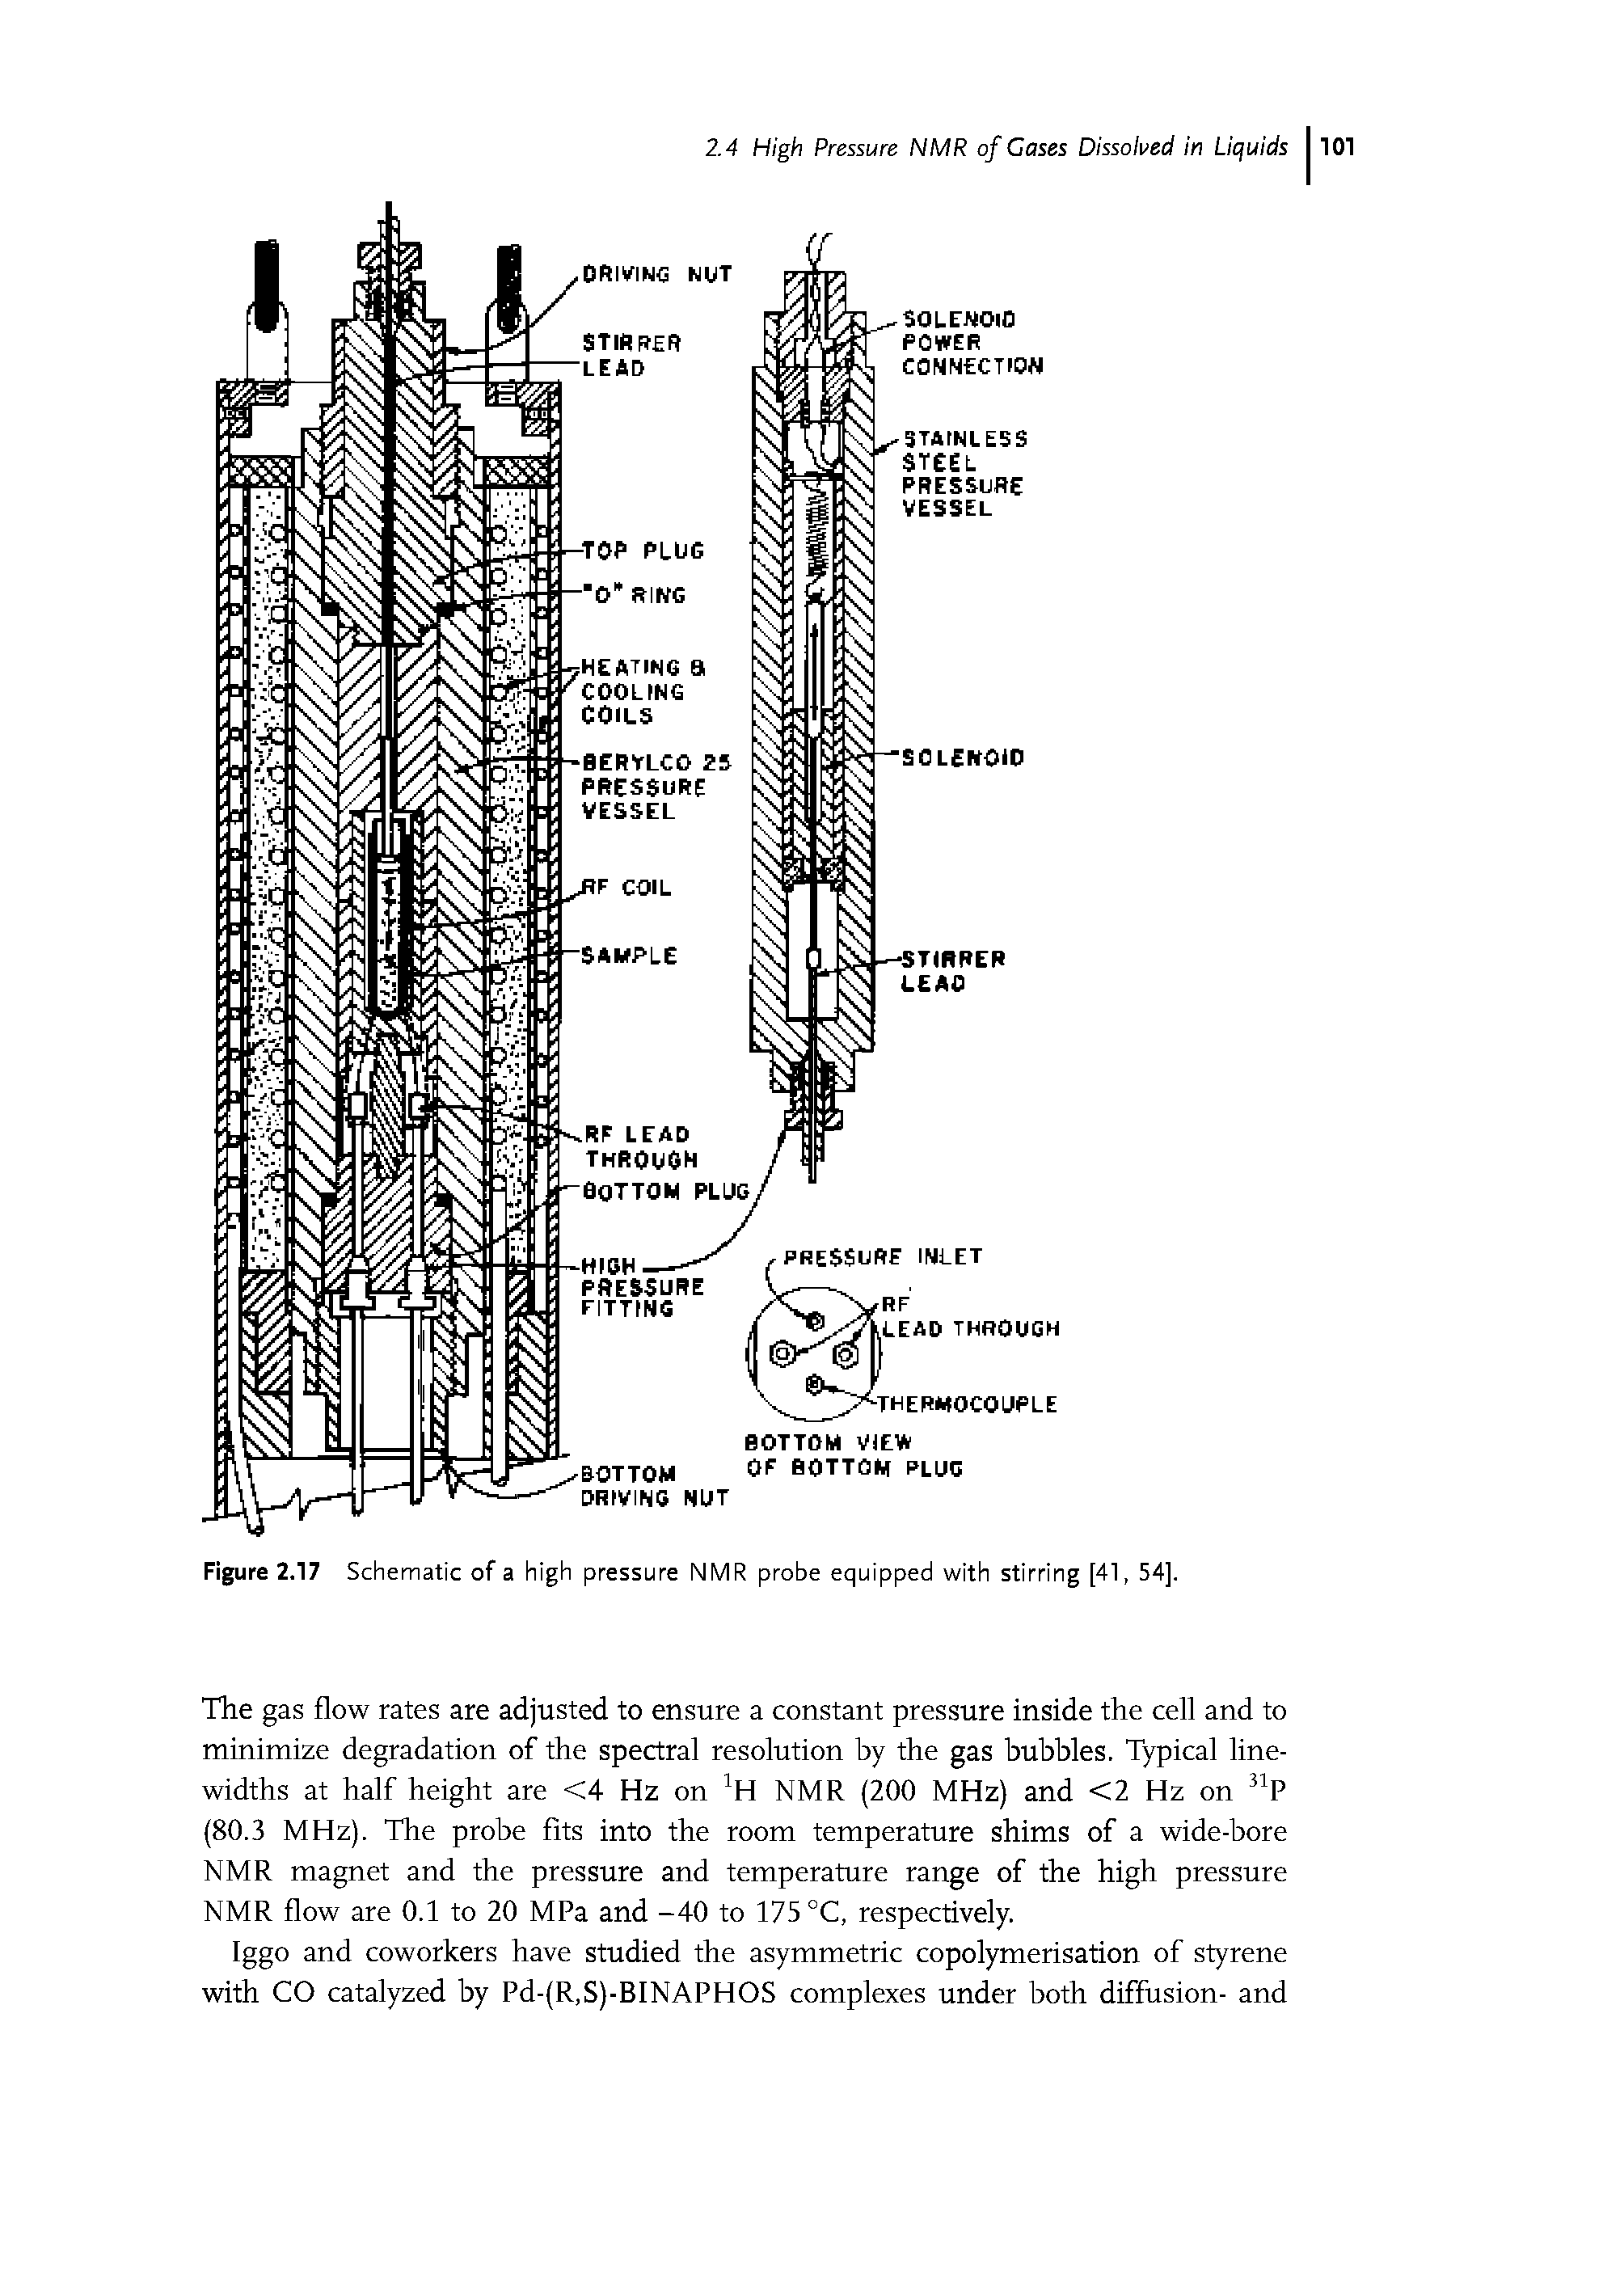 Figure 2.17 Schematic of a high pressure NMR probe equipped with stirring [41, 54].